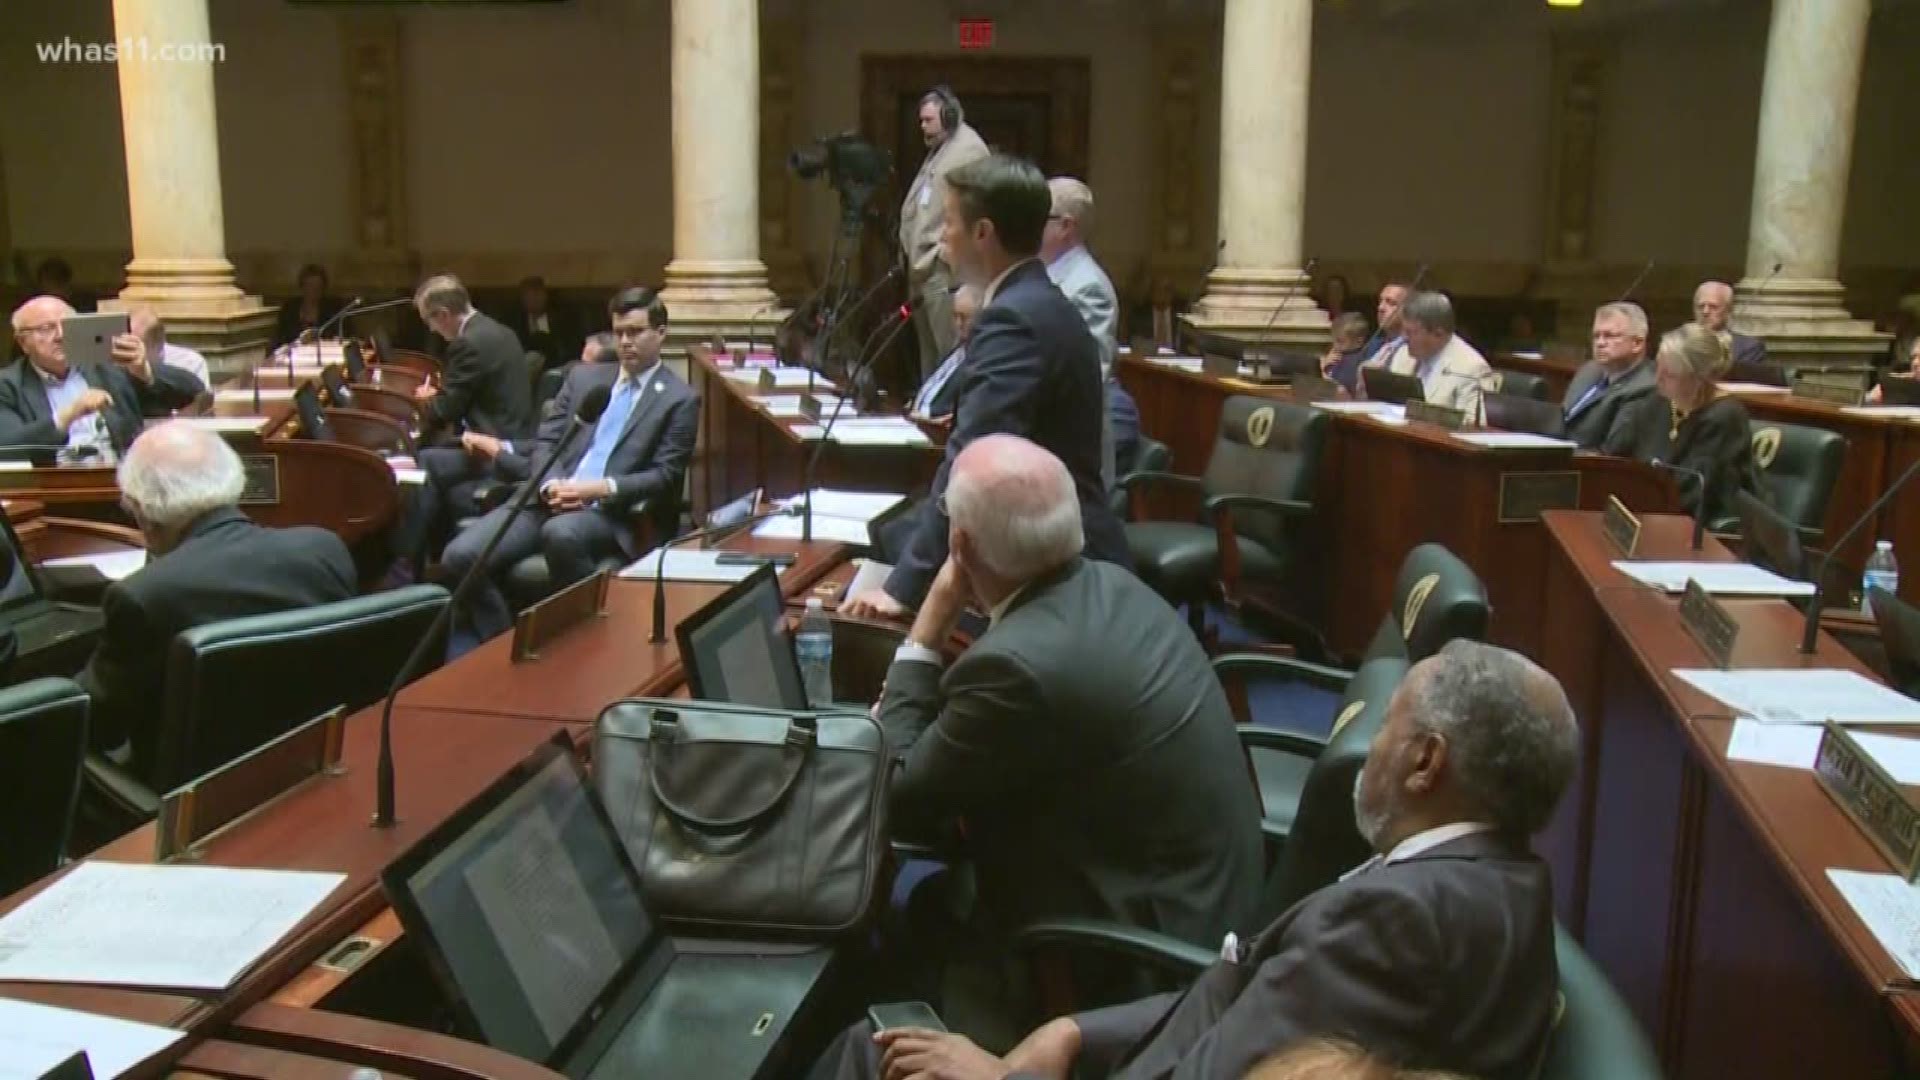 A contentious day at the Kentucky Capitol ended with a new law on the books.